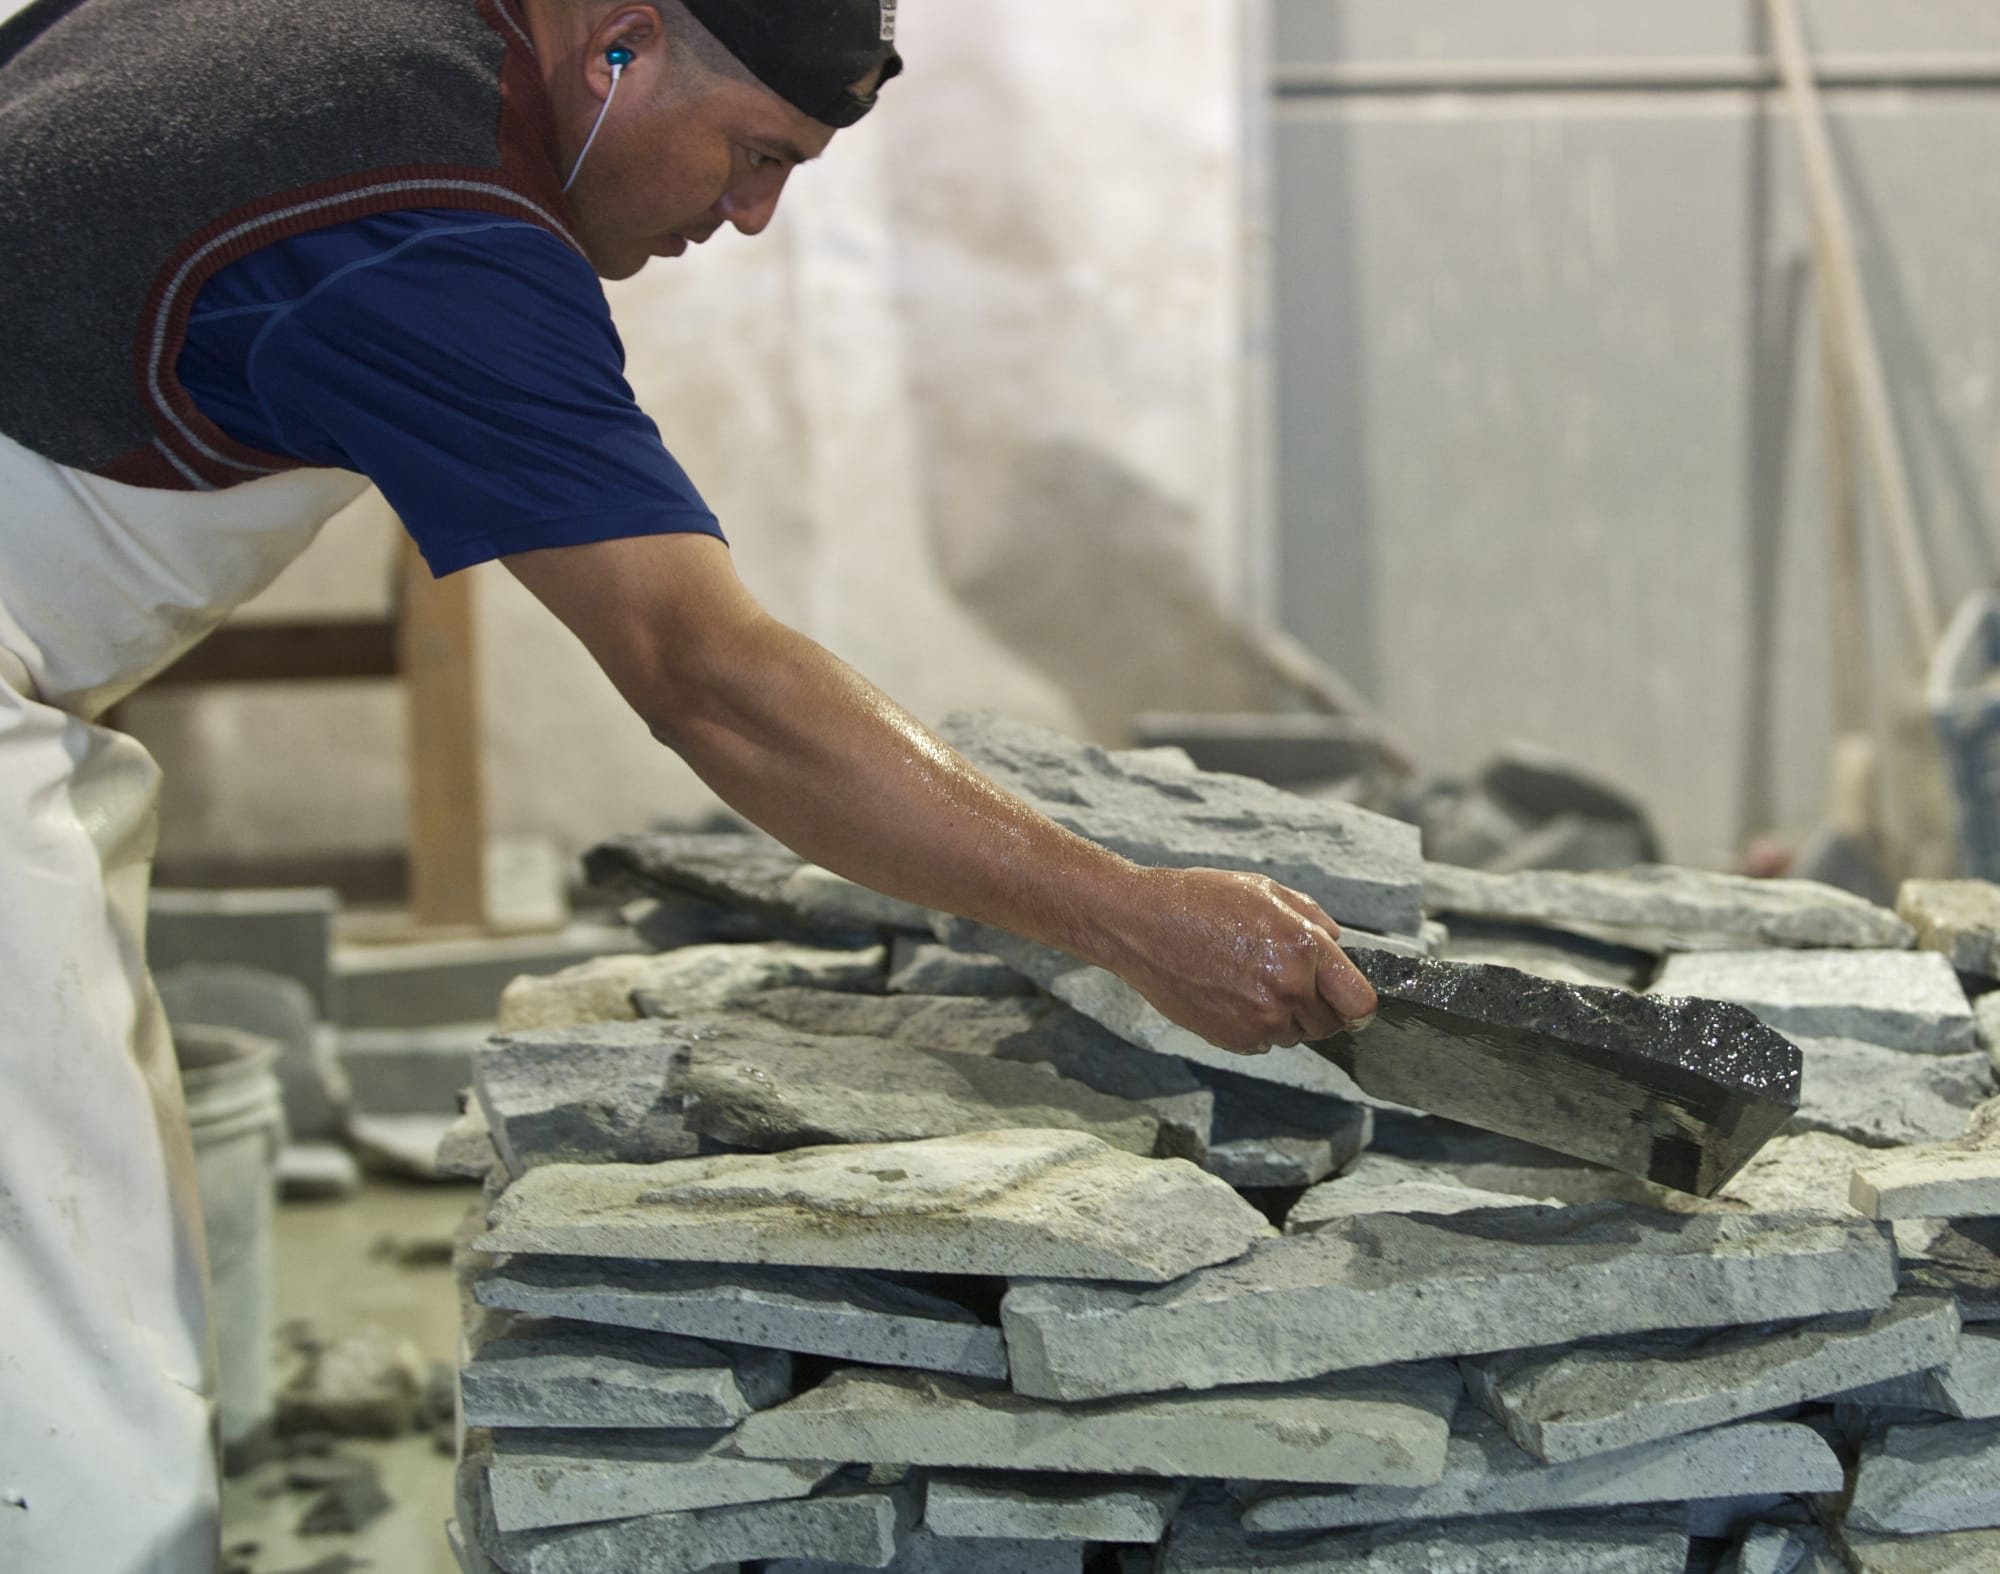 Zachary Kaufman/The Columbian
Leo Galbez places a cut stone on a stack of stones that will be used as veneers at DeCorado Stone